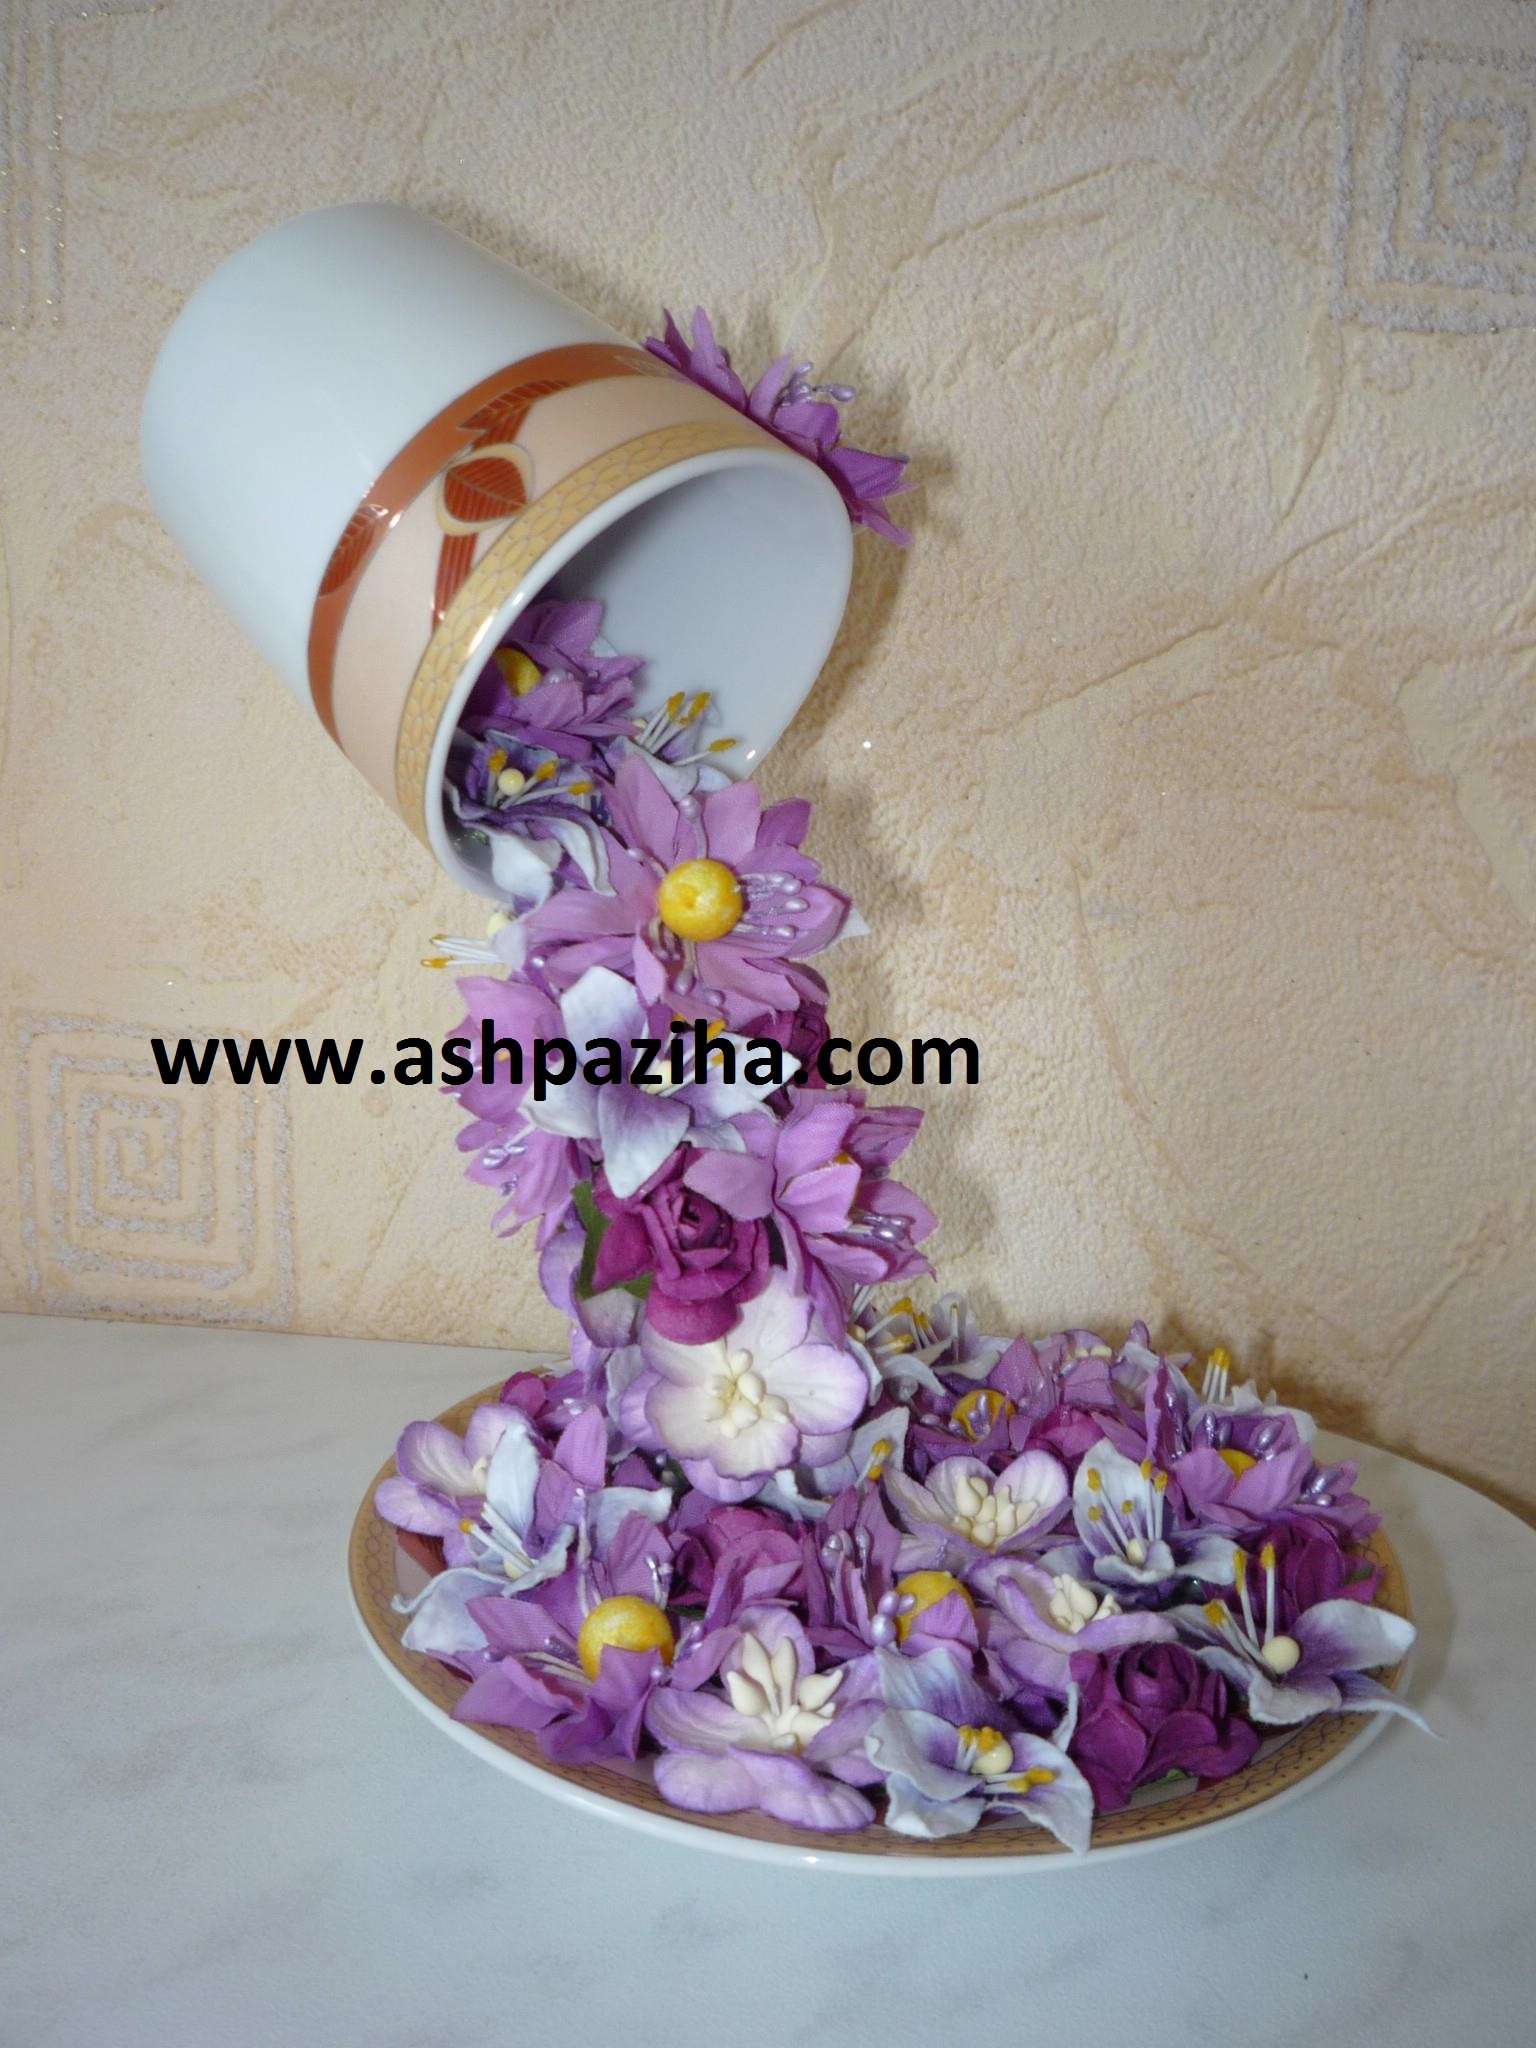 Training - image - flower decoration - cup (7)